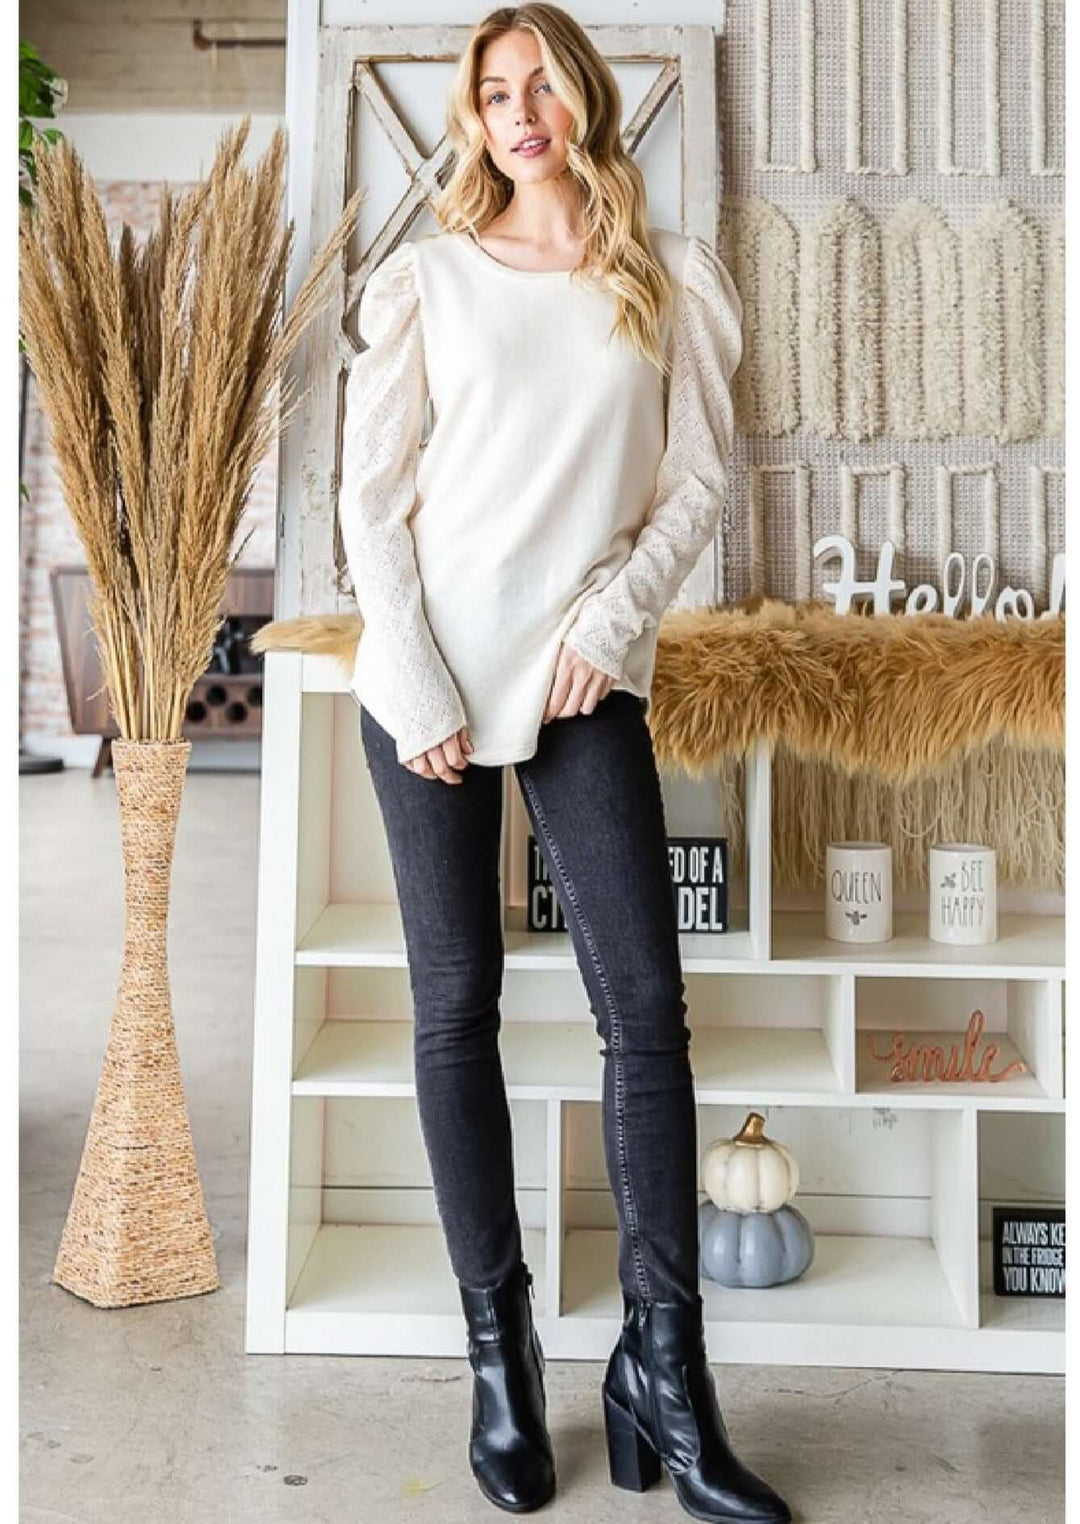 USA Made Ladies' Very Soft Lace Long Sleeve Super Soft Top in Cream with Puff Shoulder | Classy Cozy Cool Women's Made in America Clothing Boutique